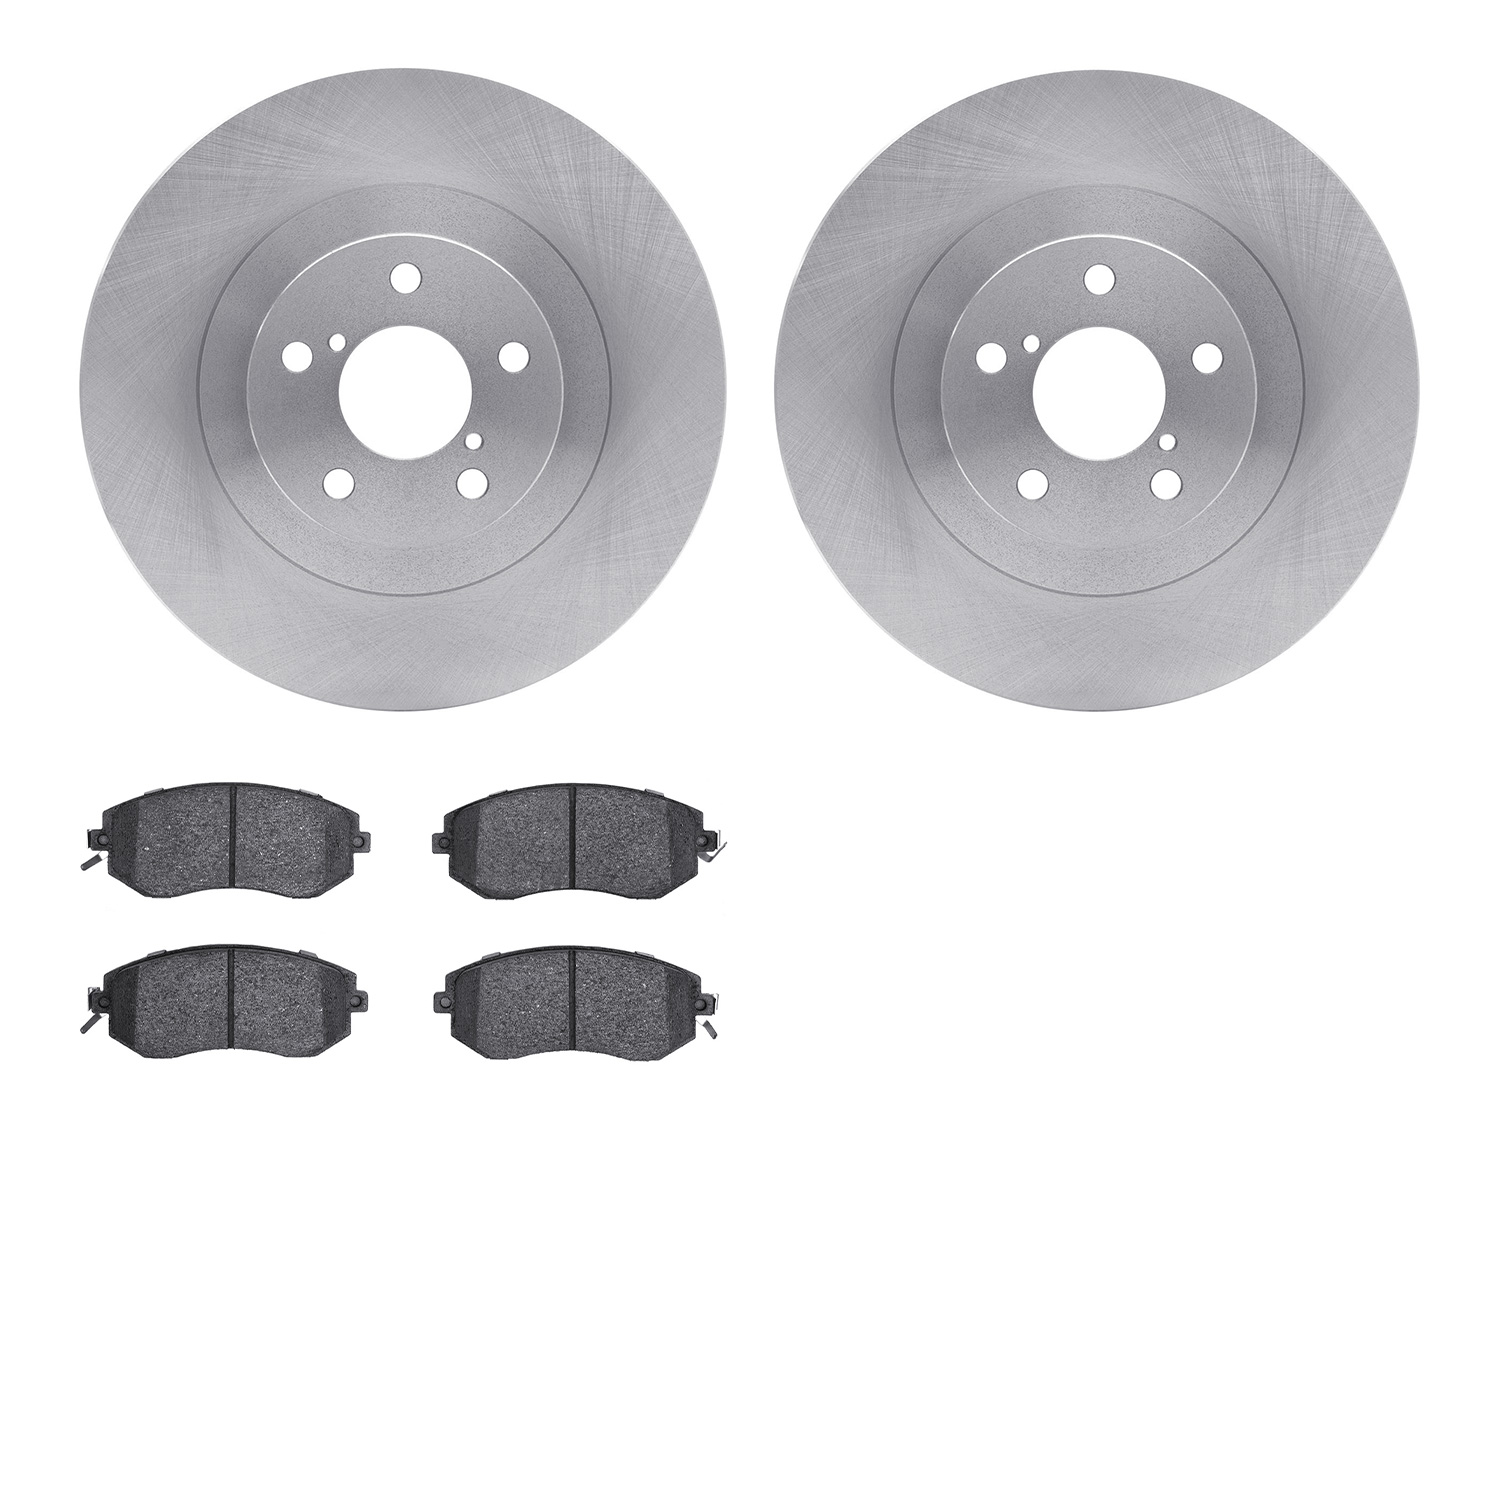 6302-13051 Brake Rotors with 3000-Series Ceramic Brake Pads Kit, Fits Select Multiple Makes/Models, Position: Front